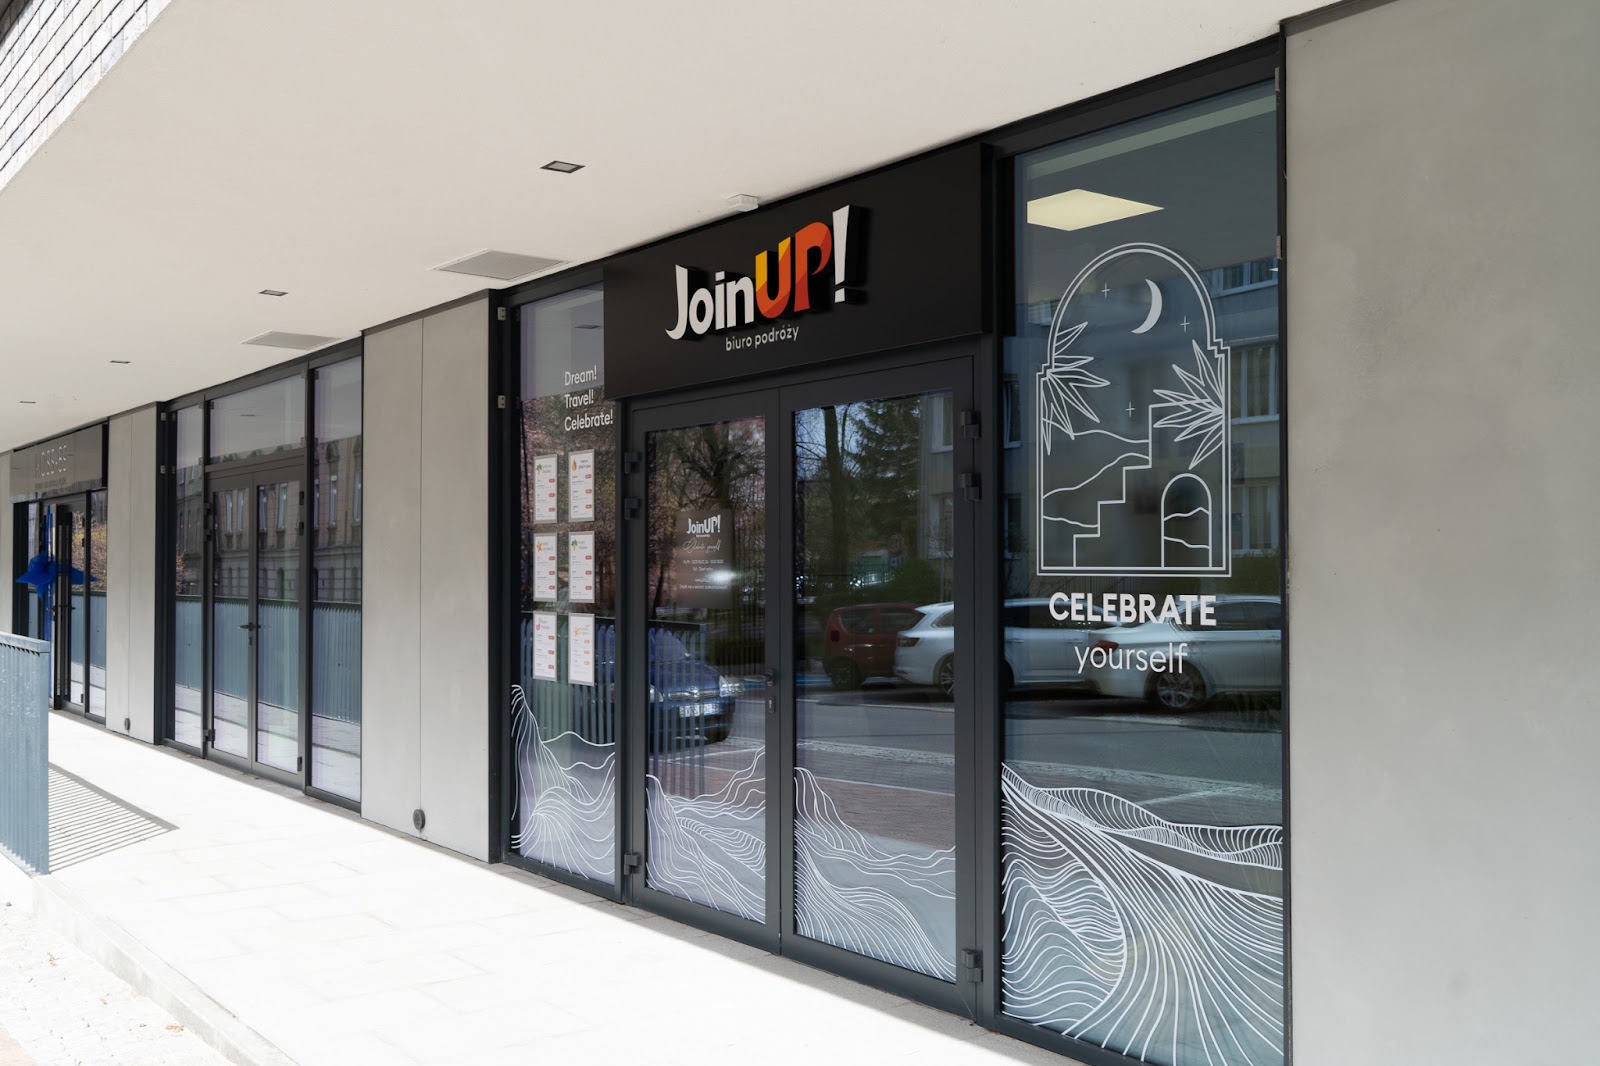 The Join UP franchise has been opened in Katowice, Poland